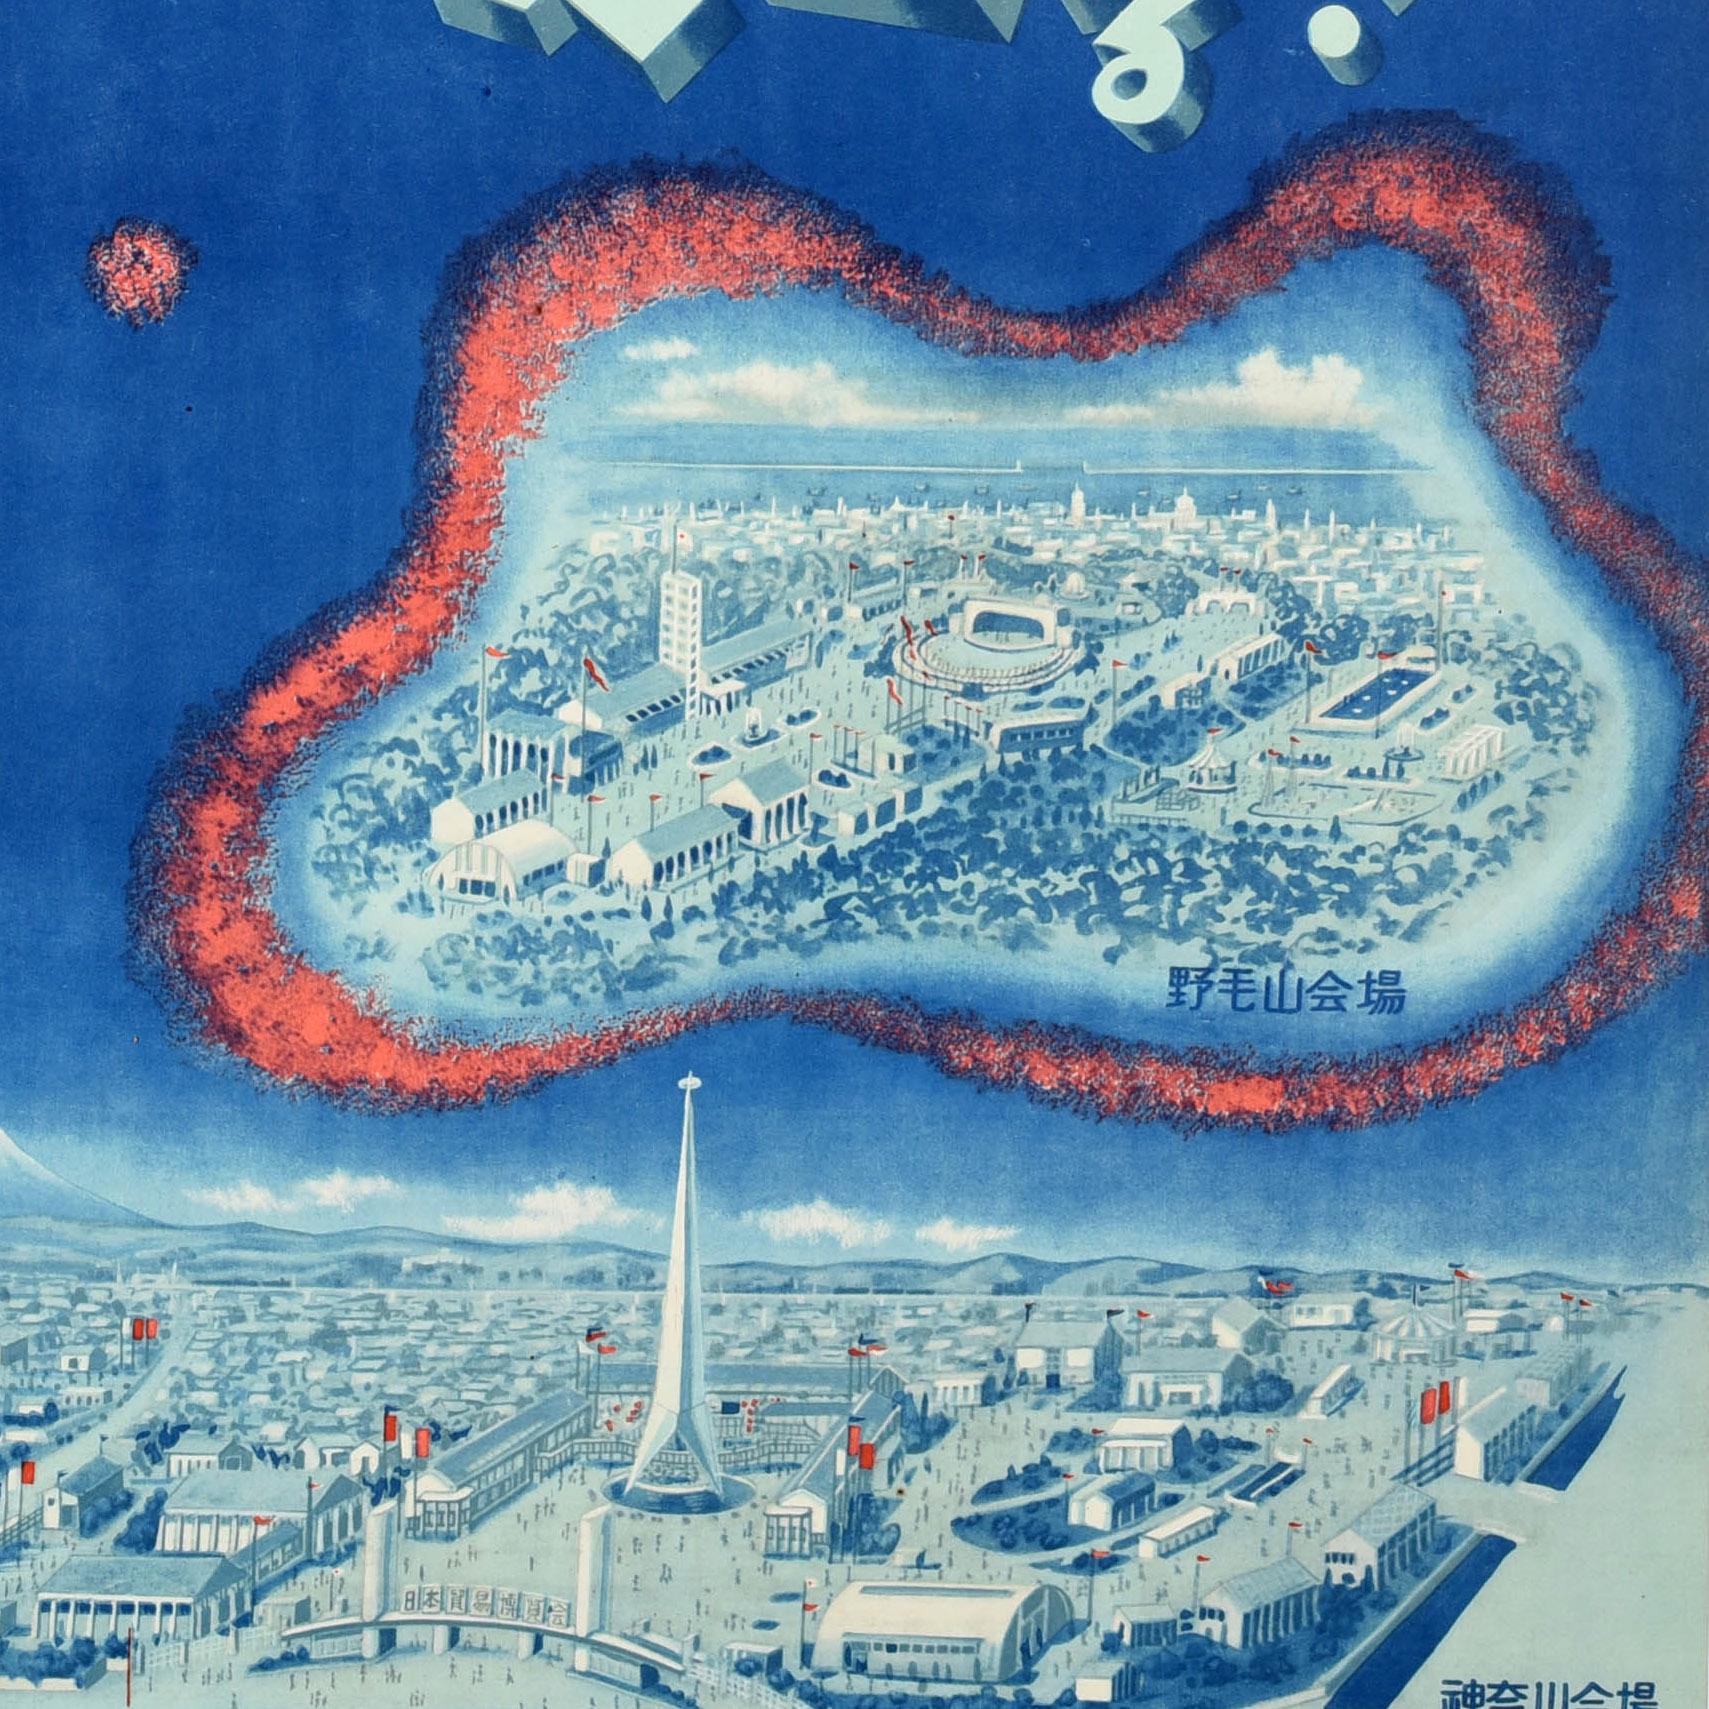 Original vintage advertising poster for the Japan Trade Expo / 日本貿易博覽會 on 15 March 1949 at Nogeyama Park Yokohama City featuring a view over the city with a train running along a railway in the foreground and a snow topped Mount Fuji visible in the